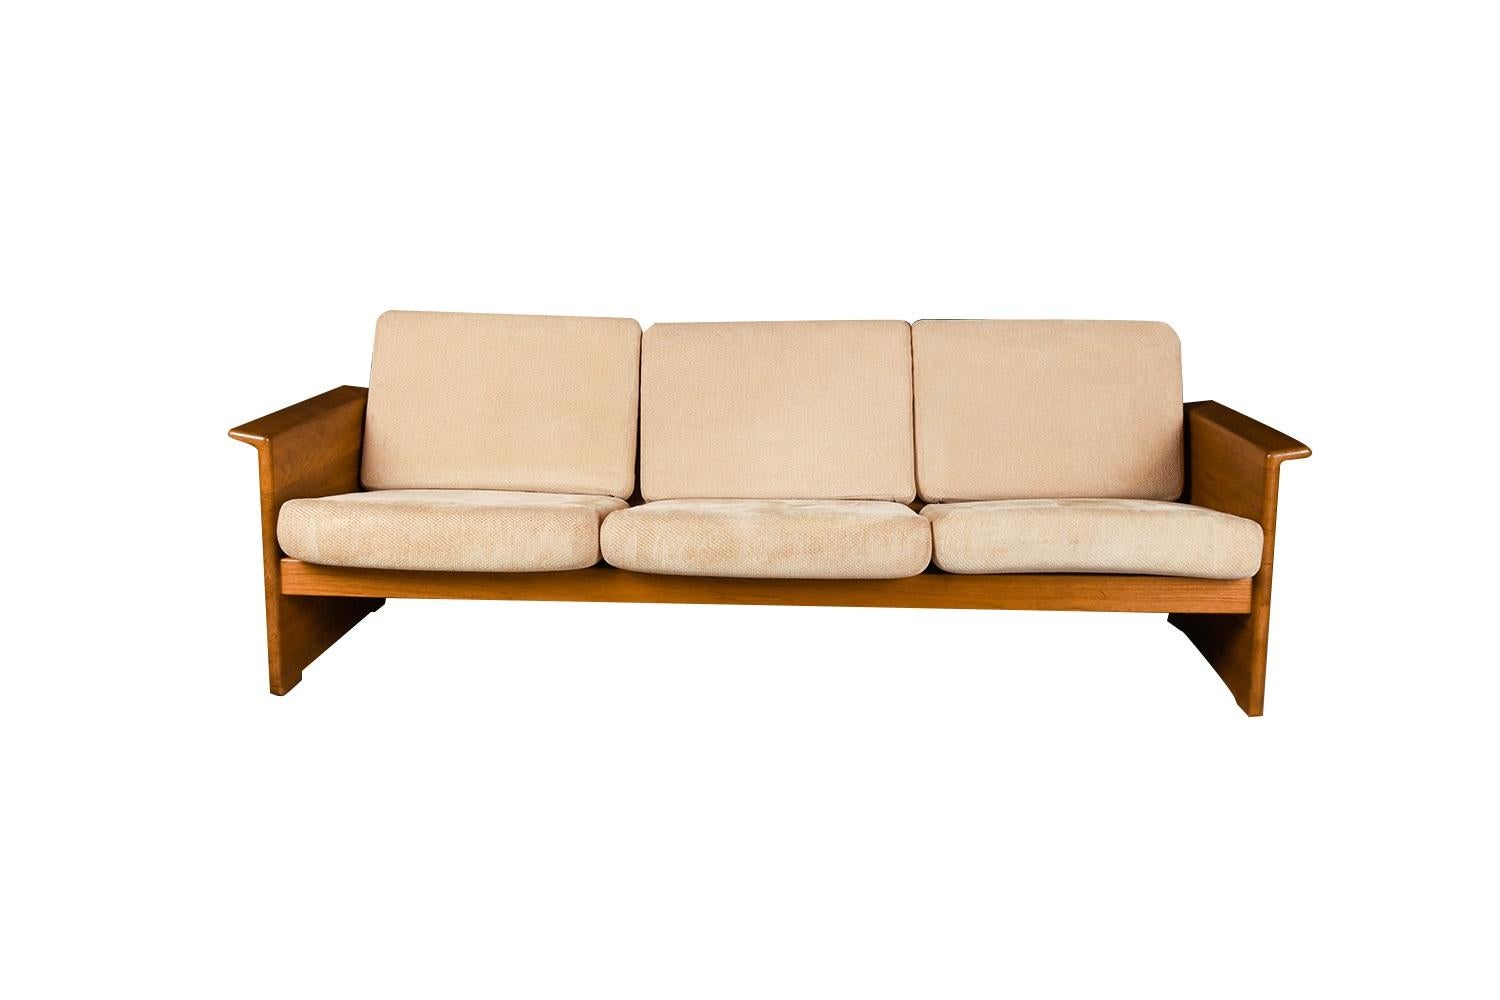 Stunning Mid-Century Modern Danish three-seat sofa, in original soft fabric from Domino Mobler, made in Denmark. An exceptional sofa both for its form and quality, it is a distinctive and heavily crafted work of rectangular form with curved arms and